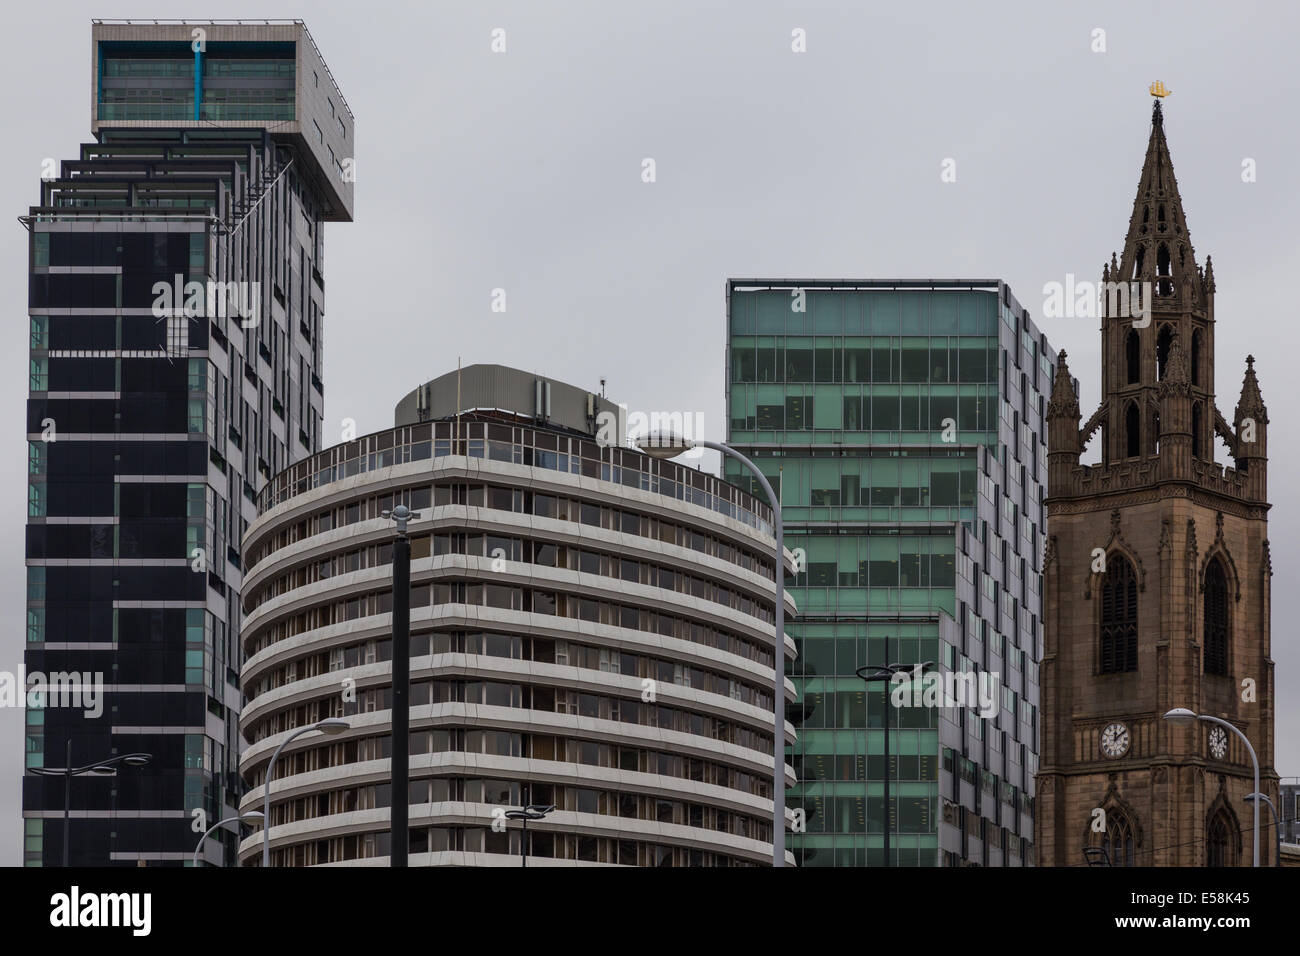 Contrasting Architecture in the City of Liverpool Merseyside UK. Stock Photo